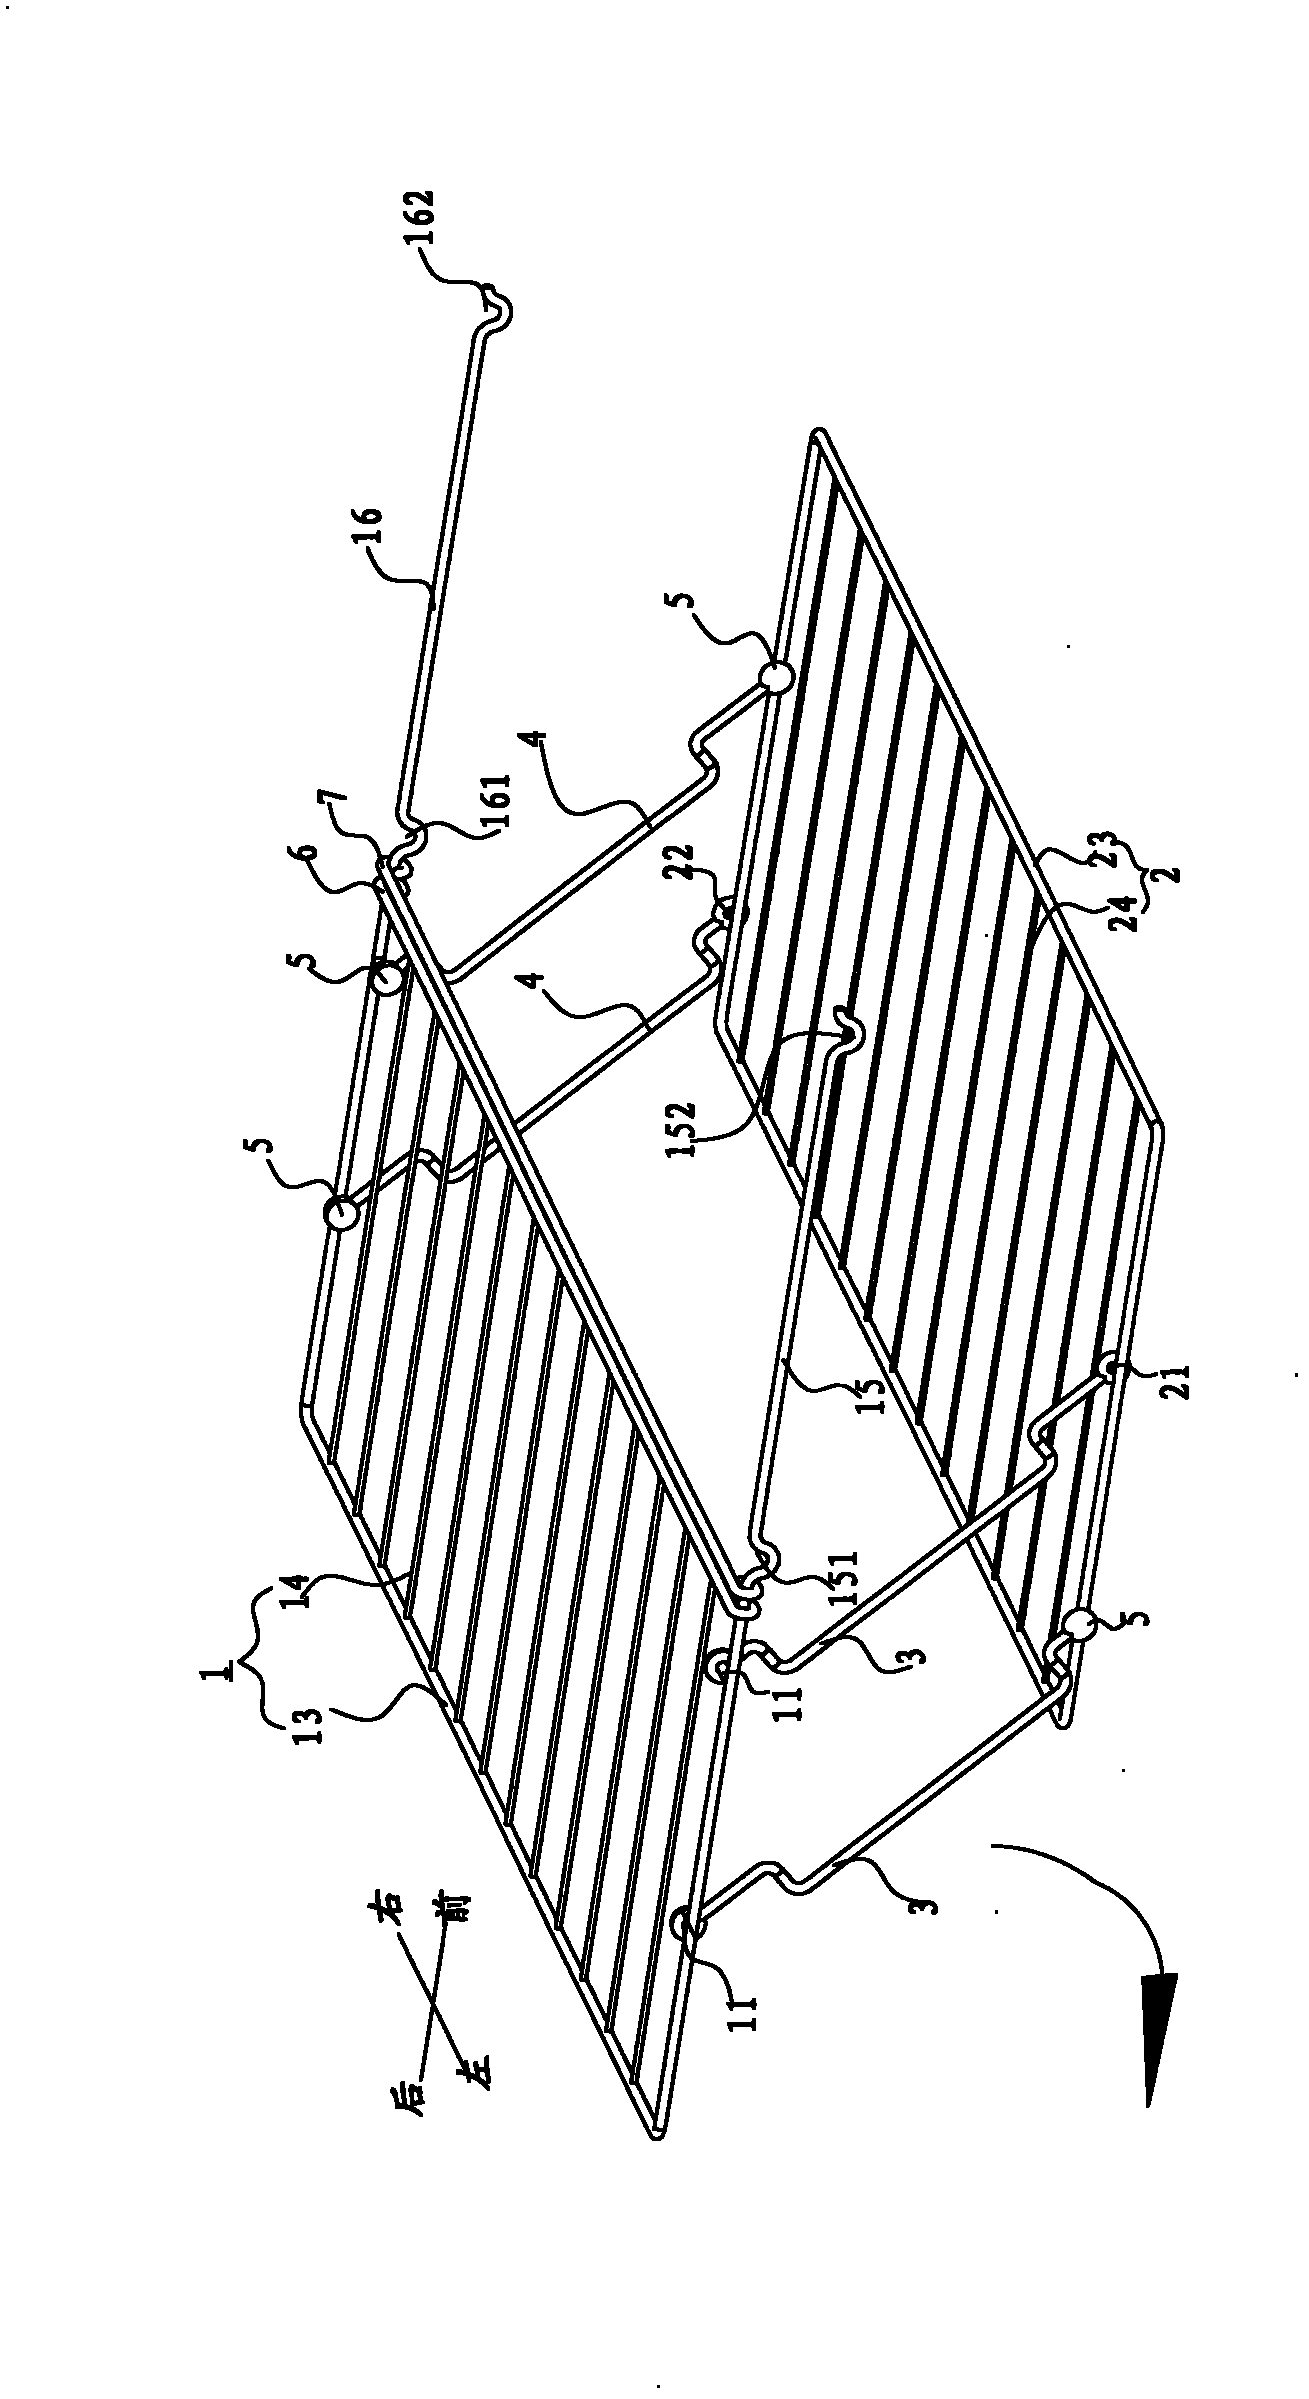 Shelf subassembly and refrigerating equipment with same